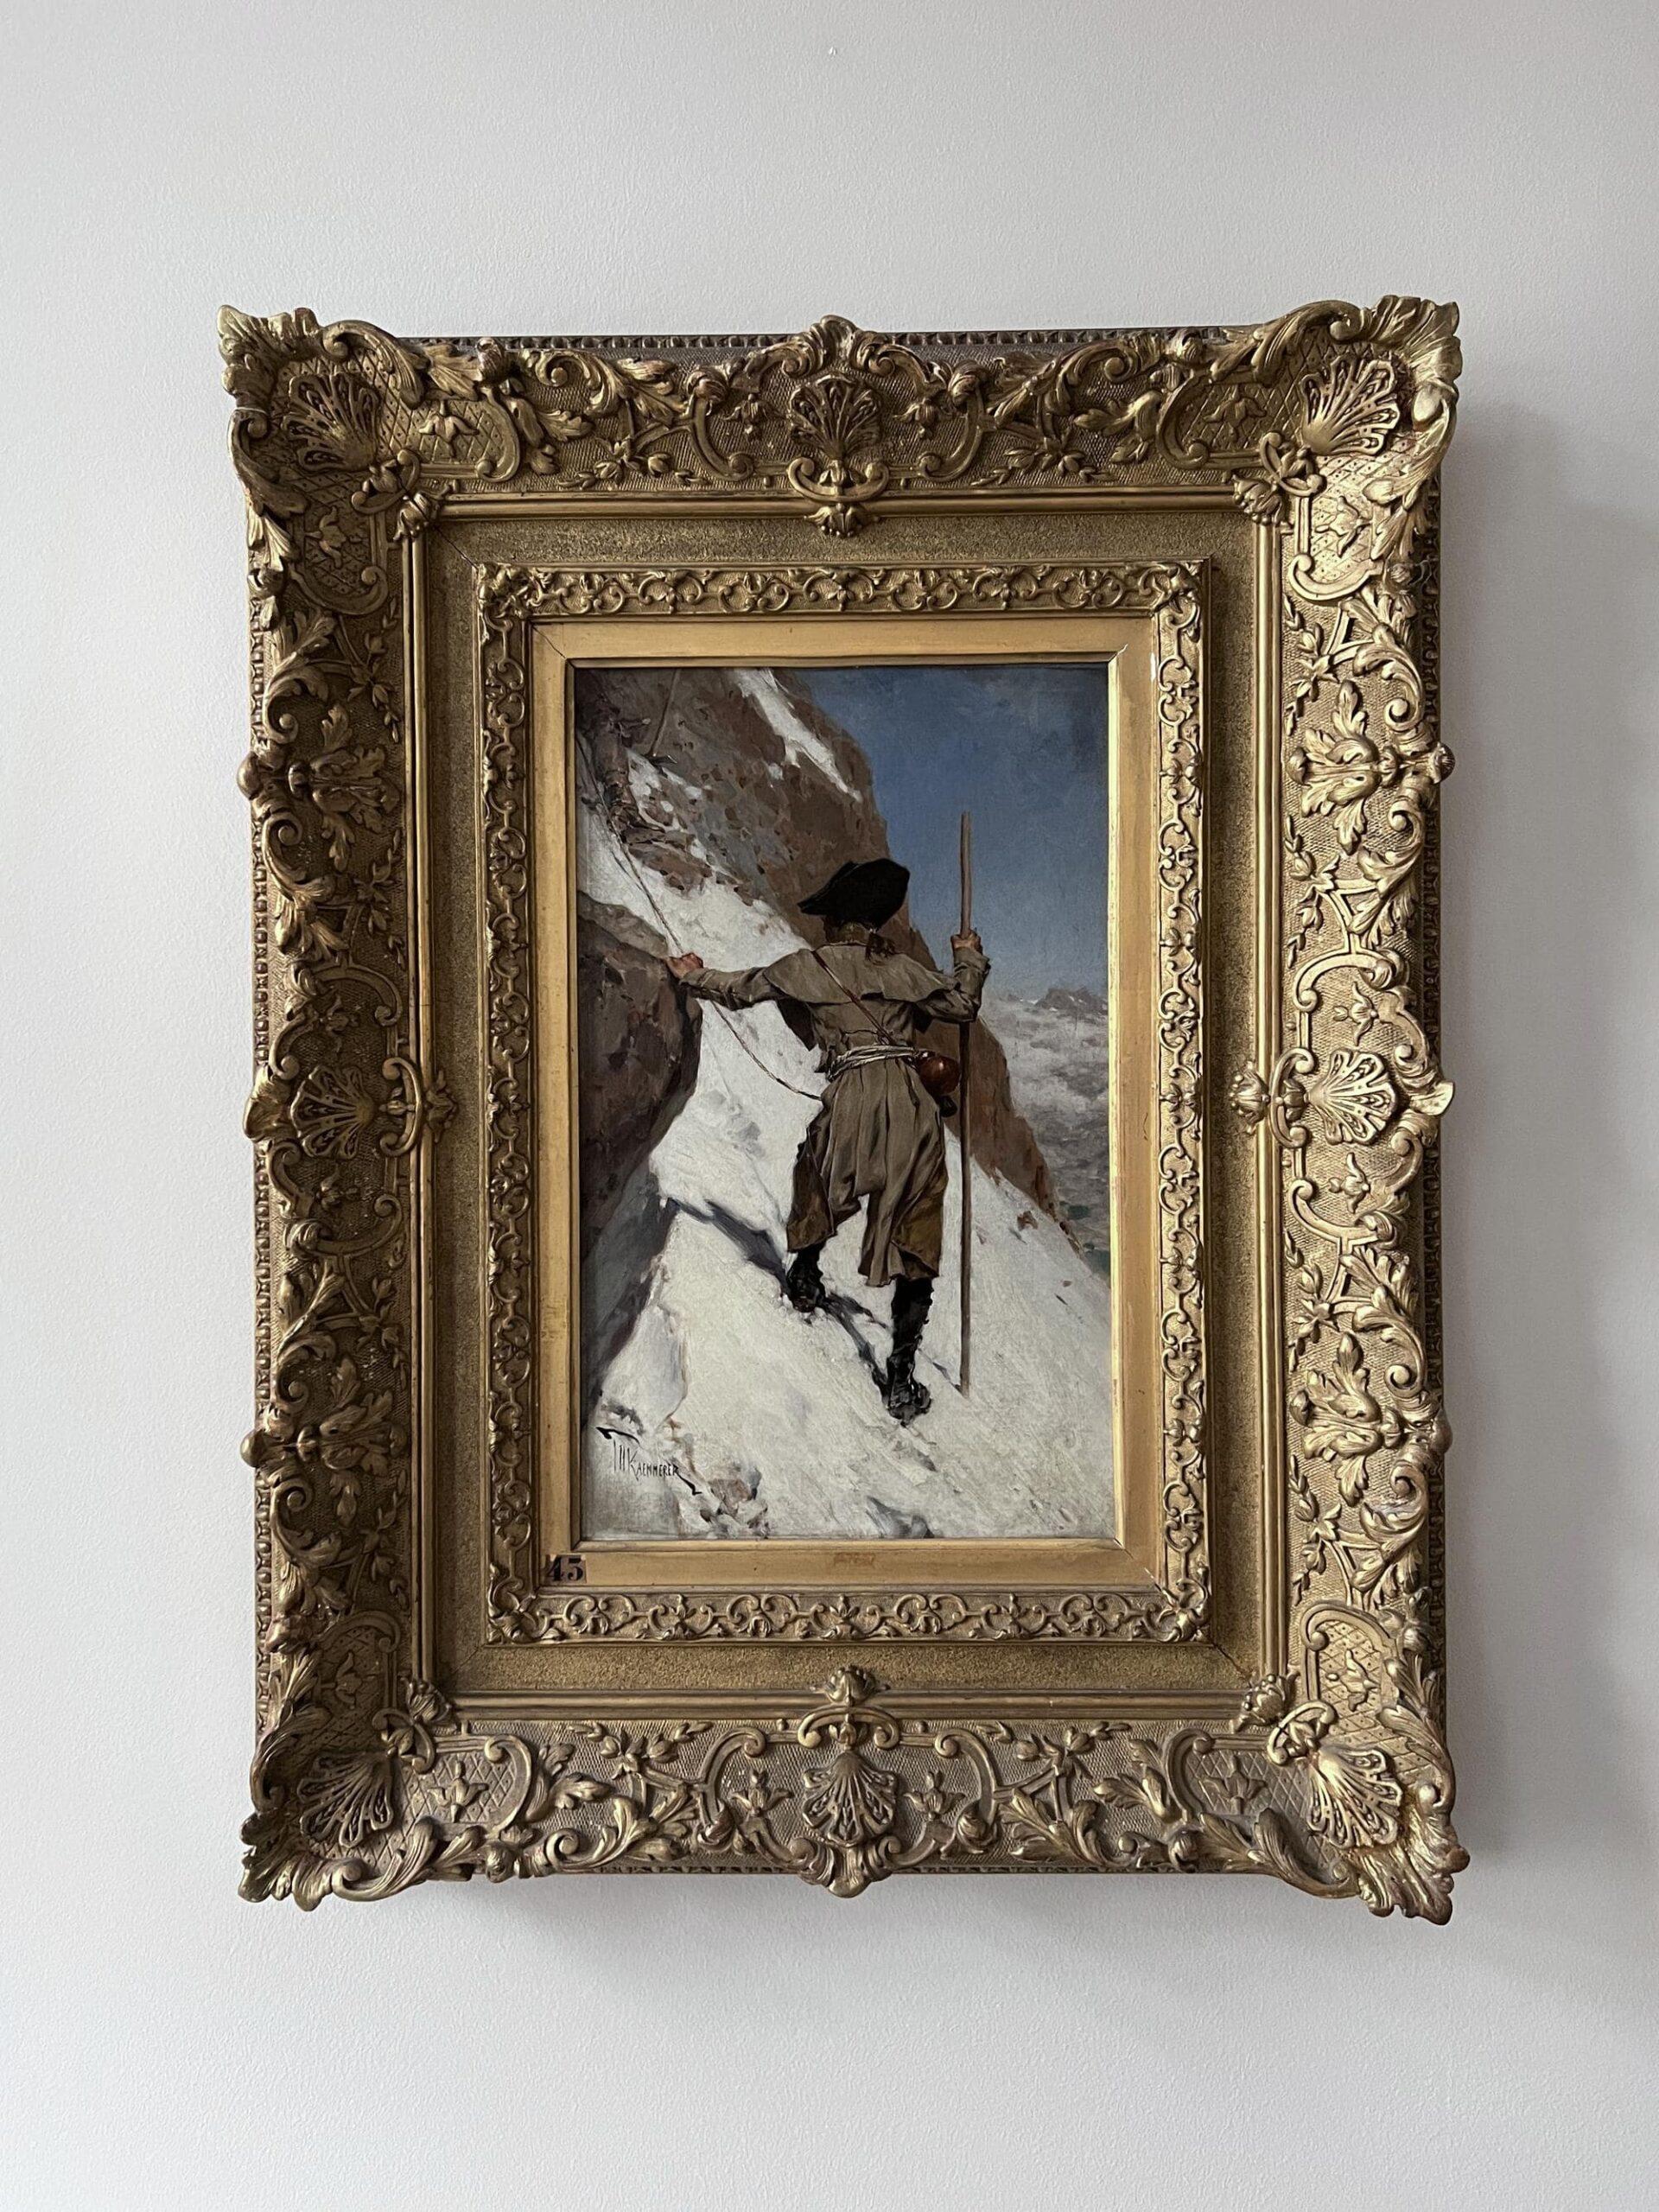 Set in a beautiful gilded frame, this artwork shows an early depiction of mountain climbing in the French Alps.

Signed by artist on lower left corner.

Frederik Hendrik Kaemmerer (1939-1902) was a Dutch painter born in The Hague. He originally